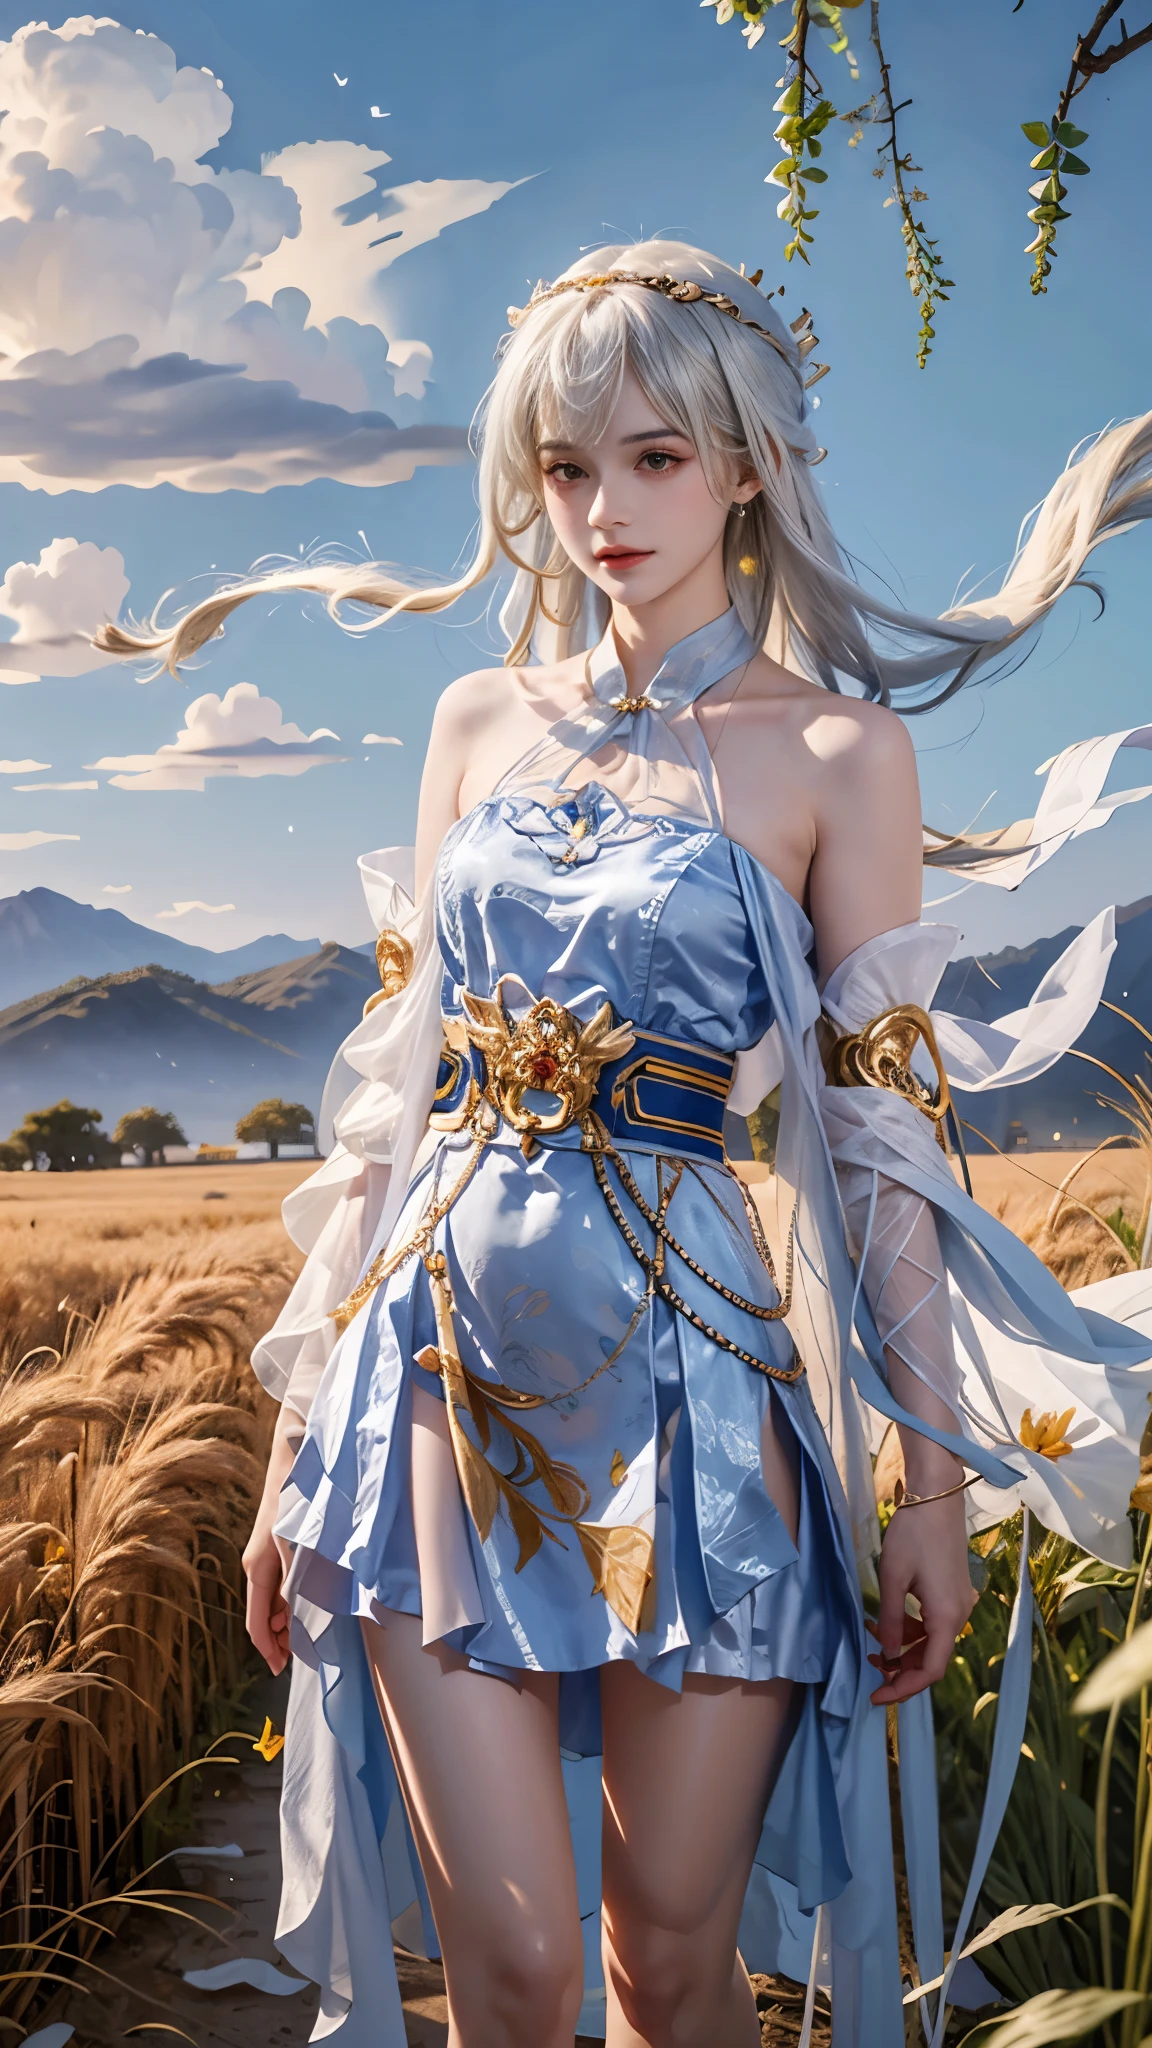 yinziping,china dress, masterpiece，best quality，high quality，High definition，high quality的纹理，high quality的阴影，High details，beautiful details，fine details，Extremely detailed CG，Detailed texture，lifelike面部表现，lifelike，rich and colorful，exquisite，sharp focus，(intricate detailake up，pureerosface_v1:0.5)，(Beautiful details, exquisite face，(Beautiful details, exquisite eyes)，Perfectly proportioned face，highDetails of the skin，Details of the skin，Four fingers and one thumb in optimal proportions，emaciated:1.3)，1 girl，17 years old，high，(Smooth abdominal muscles:1.55)，(abdominal muscles:0.5)，pretty，Perfect，high，((bare shoulders)), ((The skirt is short)), (long legs)，(straight legs)，(thin waist)，((White skin))，White skin，((White skin))，(emma watson)，Big breasts，((Caucasian))，light blonde hair，Stand with legs apart，looking at the audience，whole body，Portrait of cute blonde girl，((Standing in the wheat field,Look into the distance))，bloom，orange mist，sports，Wisps of hair，lifelike，high quality渲染，amazing art，high quality，film texture，Fujifilm XT3，dream